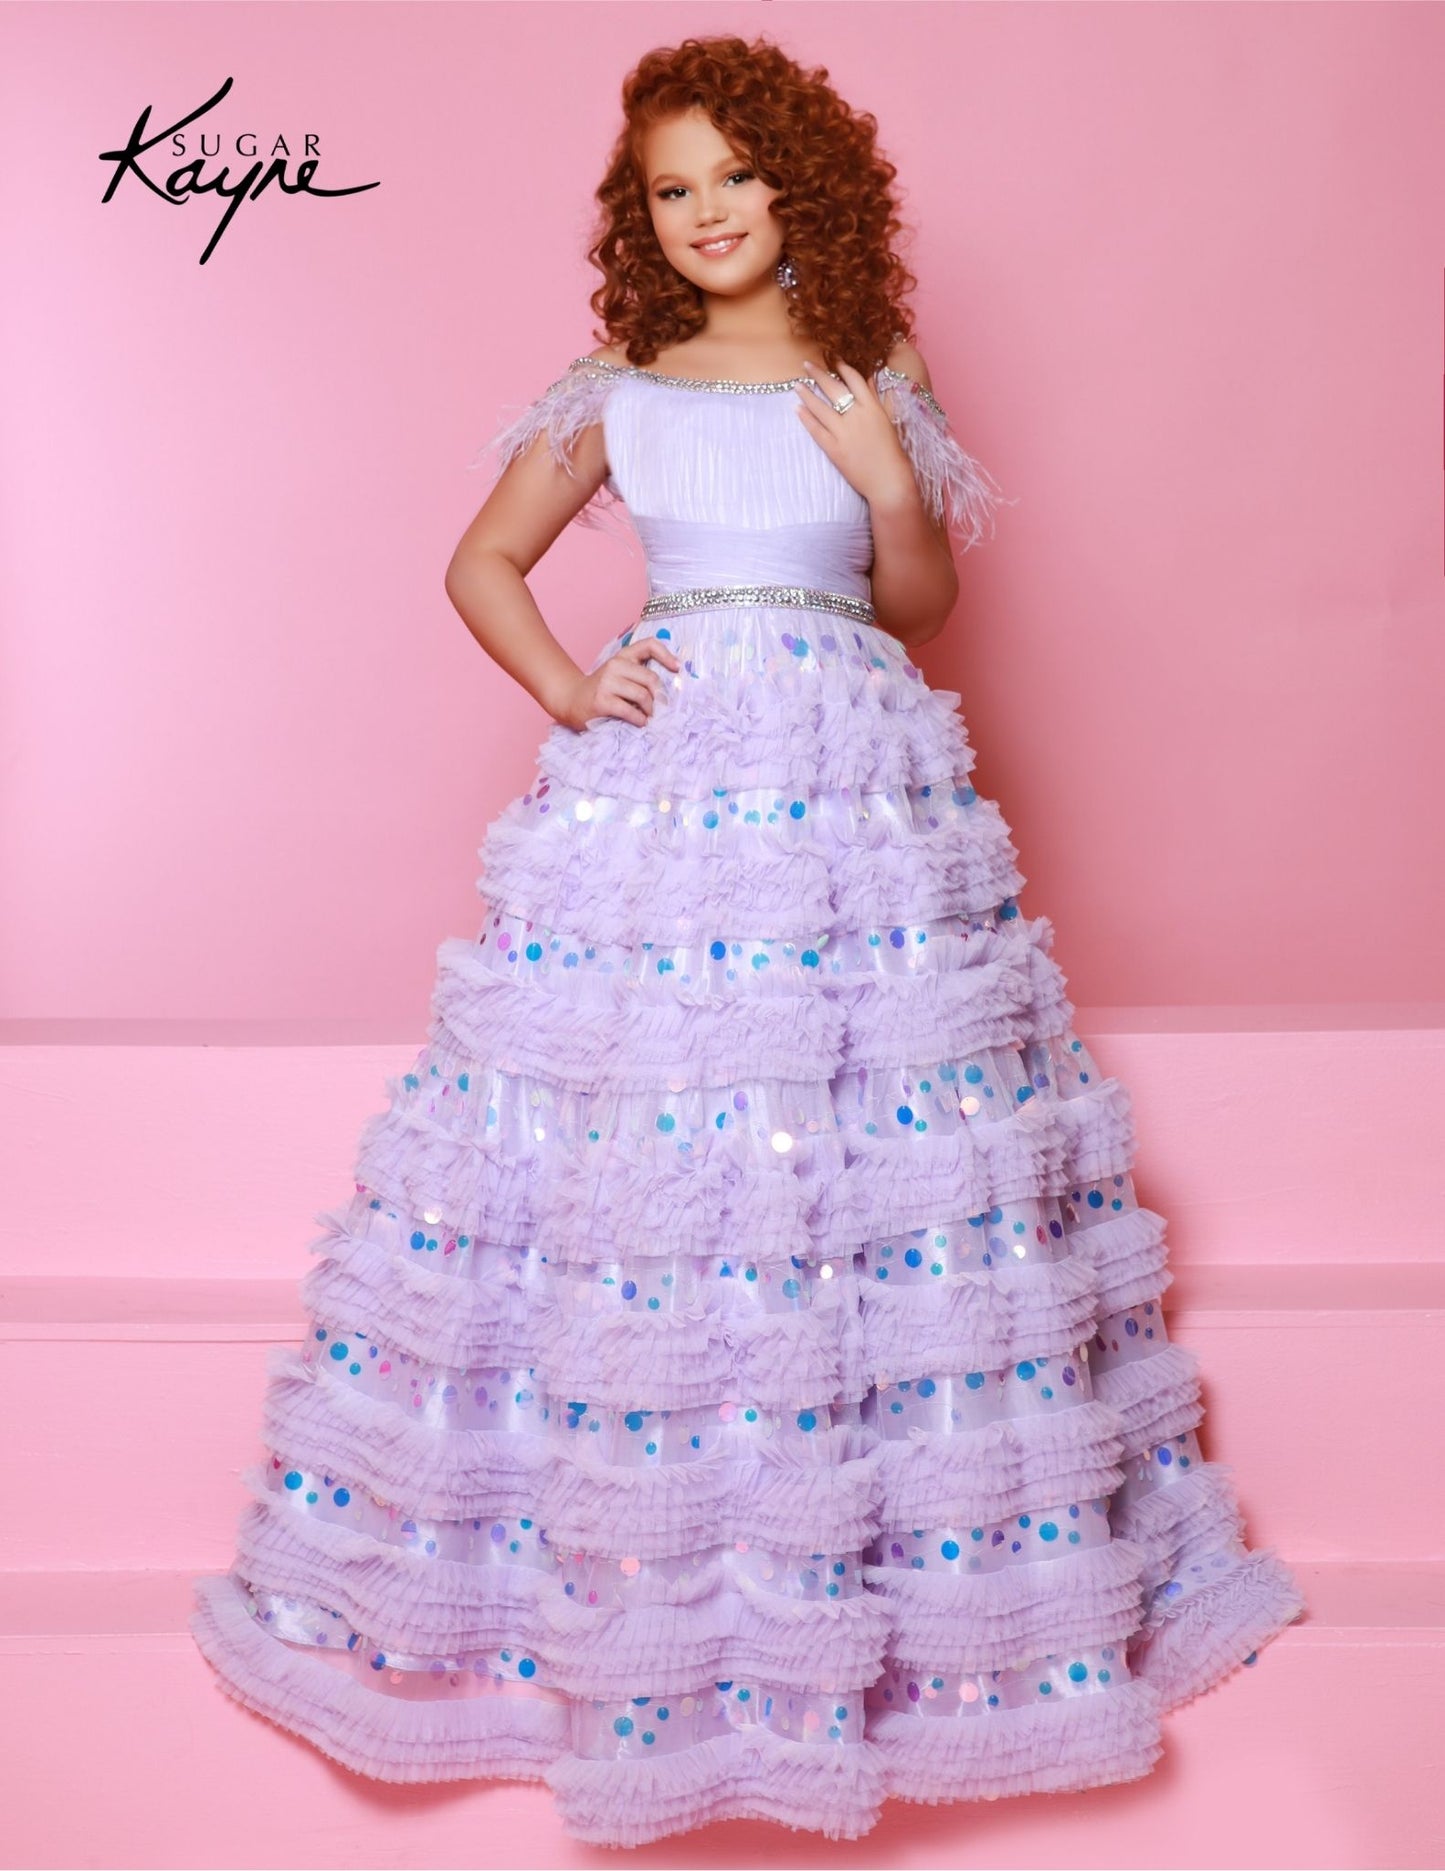 Sugar Kayne C342 is a long layered ruffled A-line ballgown designed specifically for preteen girls who want to make a statement. This one of a kind dress features off-shoulder details and feathers for an added touch of elegance. Perfect for any pageant or special occasion. Dress like the true princess you are! This enchanting mesh ballgown featuring ruffles on the skirt is designed to make you shine bright on the stage!